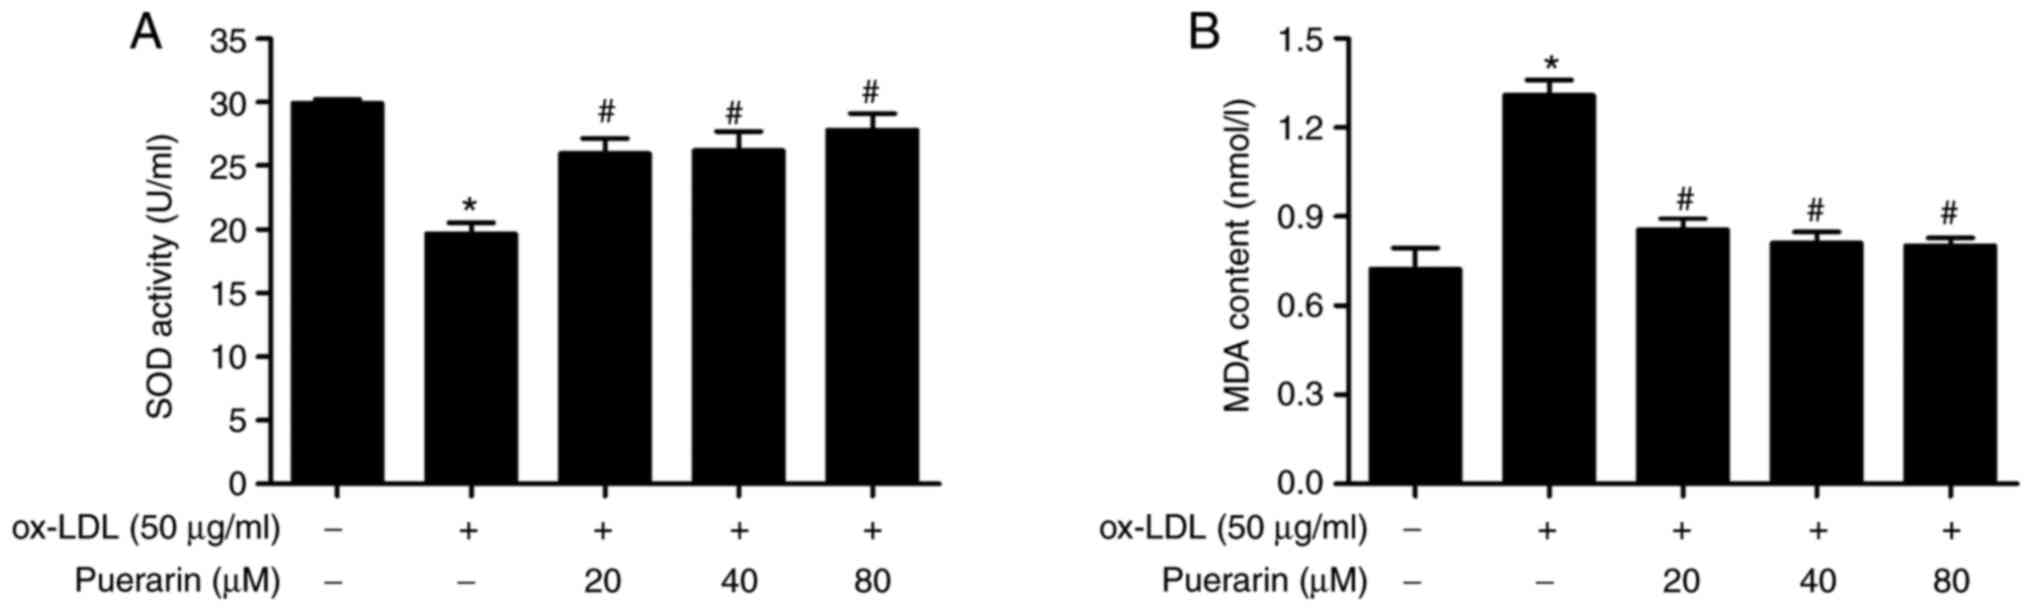 Puerarin Protects Vascular Smooth Muscle Cells From Oxidized Low Density Lipoprotein Induced Reductions In Viability Via Inhibition Of The P38 Mapk And Jnk Signaling Pathways